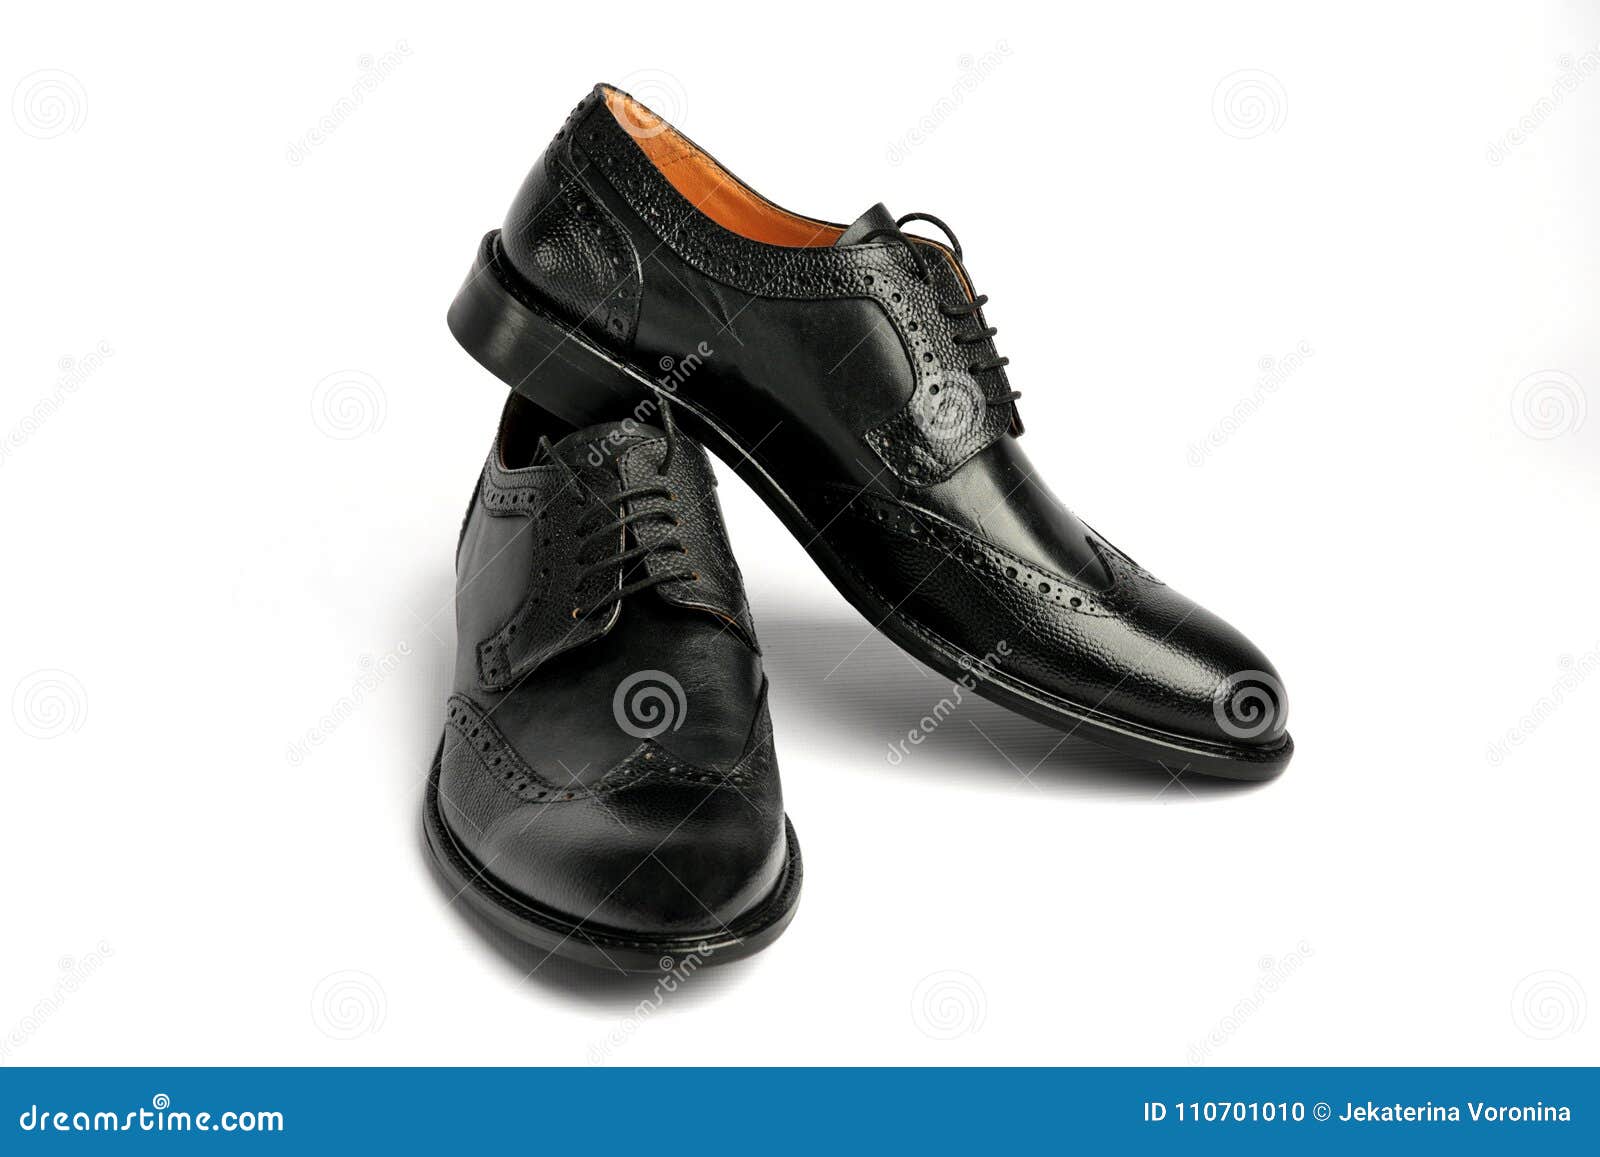 Male Black Shoes on a White Background Stock Photo - Image of isolated ...